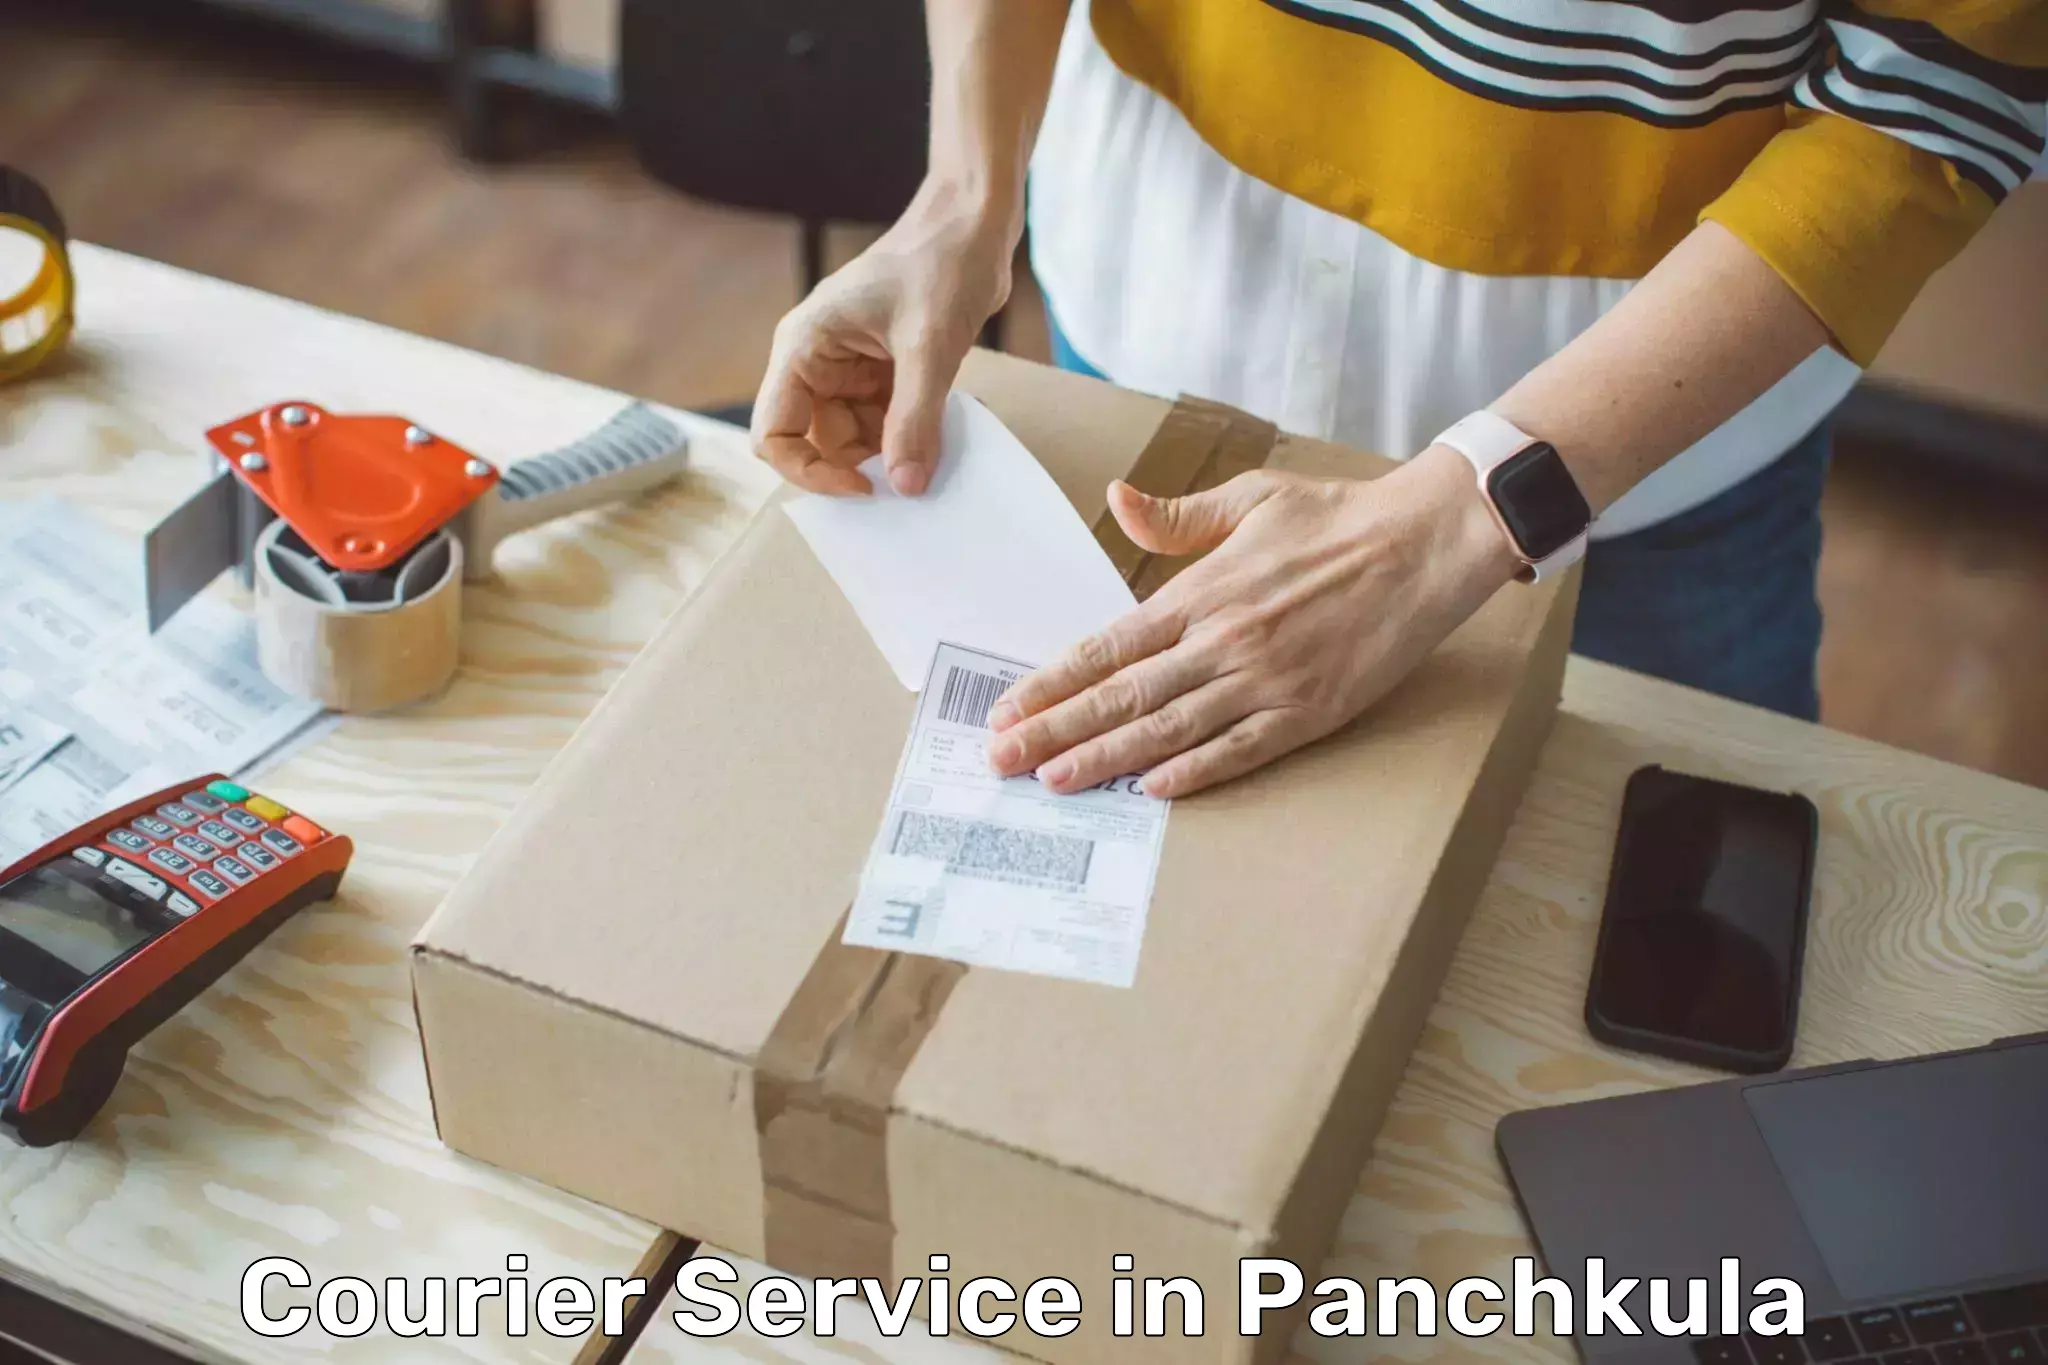 Medical delivery services in Panchkula